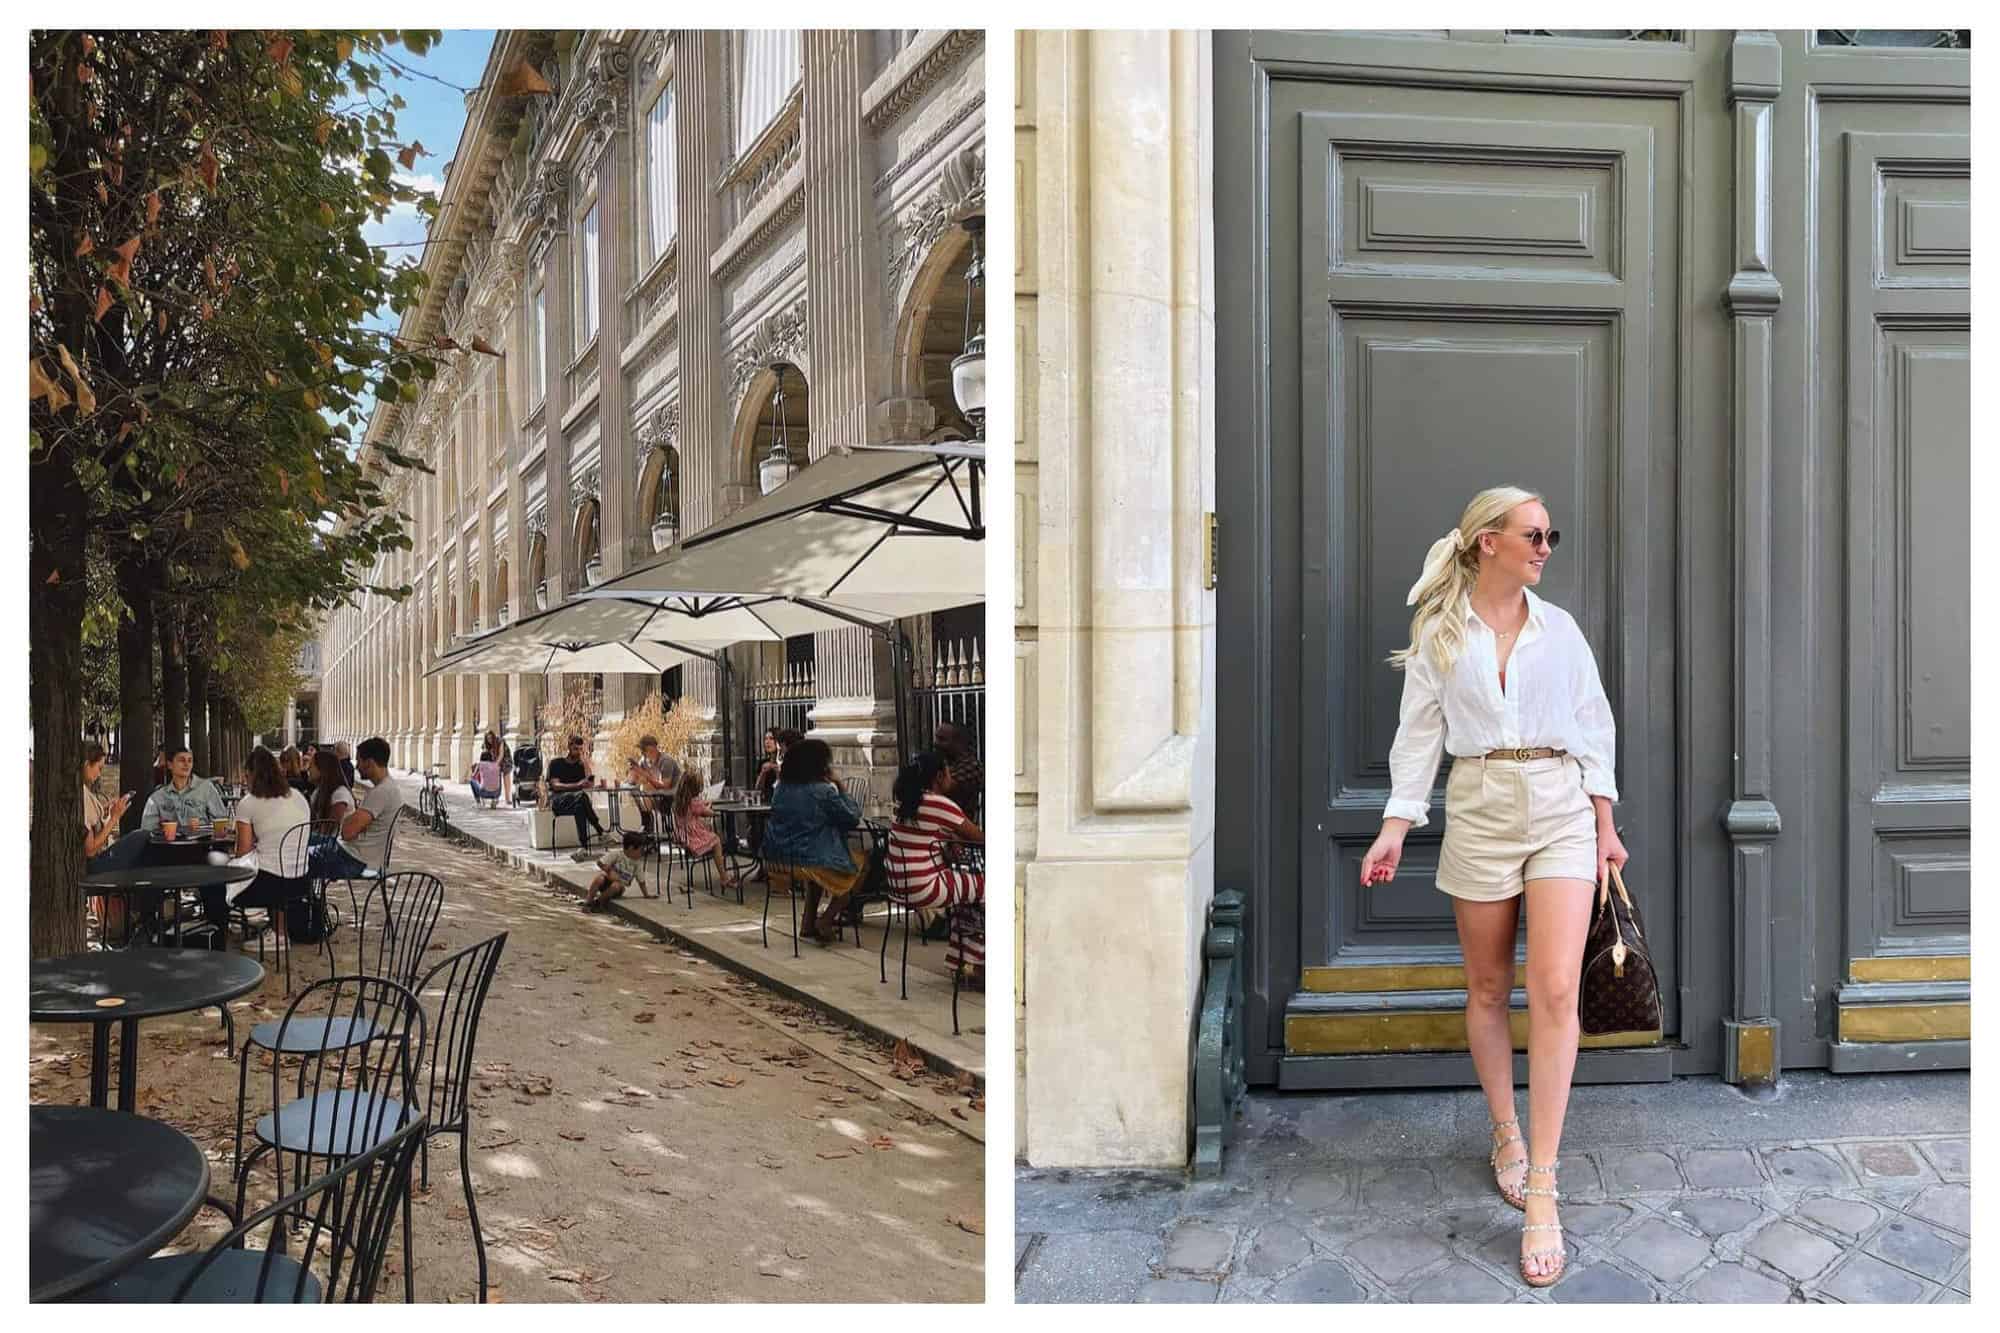 Left: a Paris Cafe in the royal gardens with outdoor seating between trees and the buildings, Left: a woman standing in front of a french apartment door wearing a white button up and tan shorts
